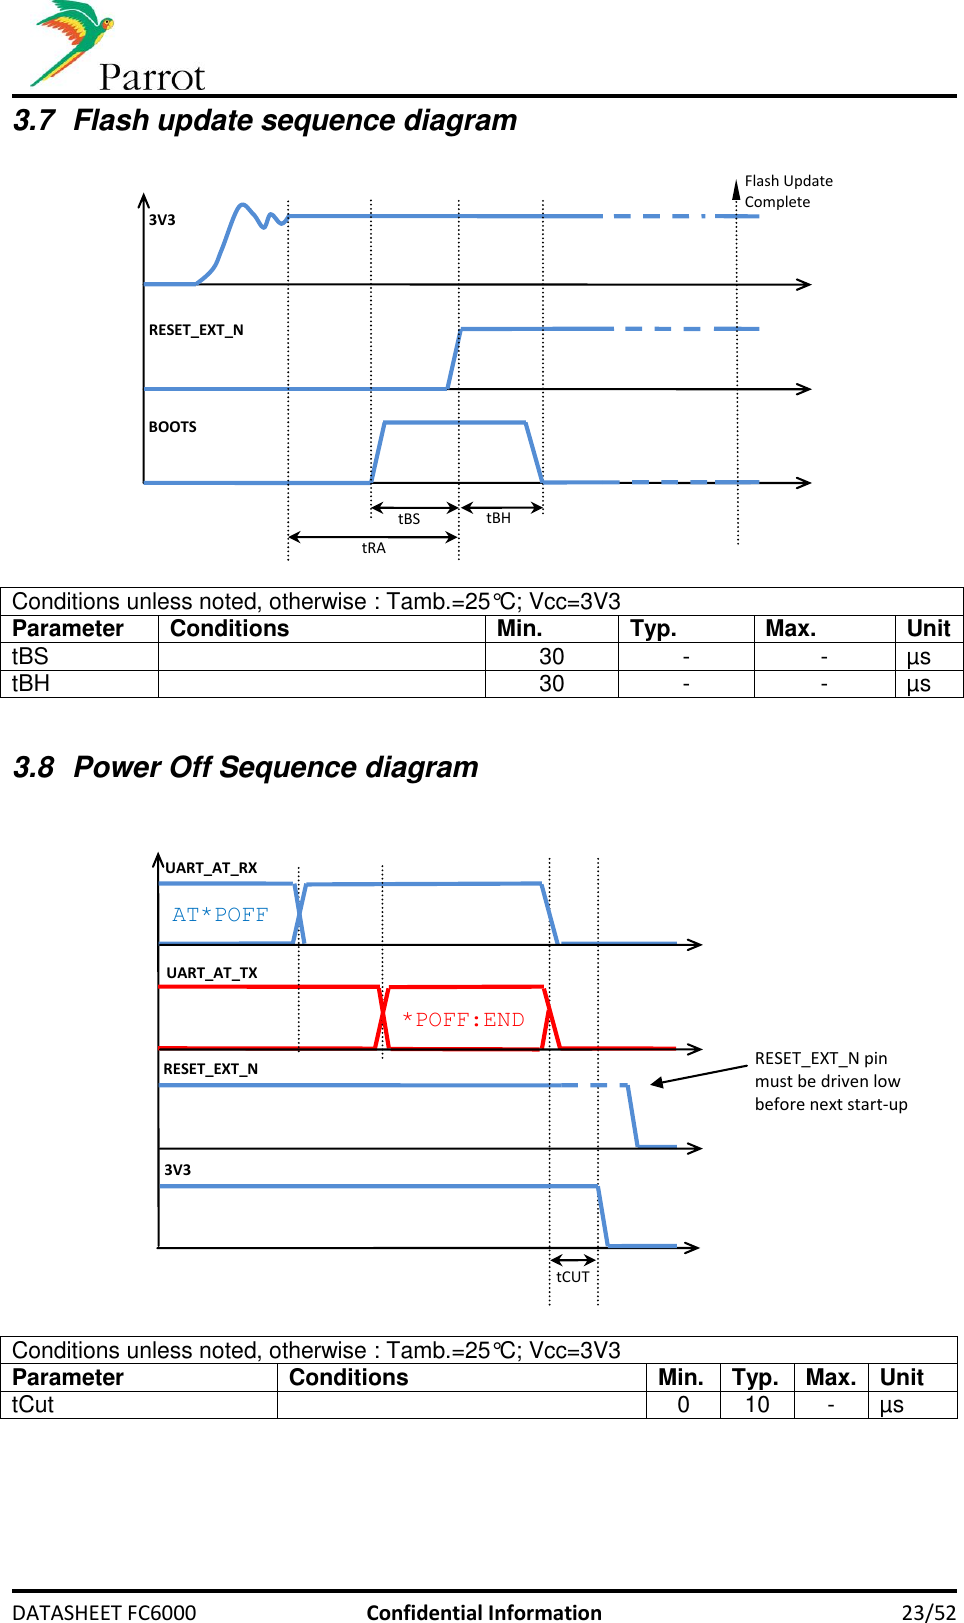     DATASHEET FC6000  Confidential Information 23/52 3.7  Flash update sequence diagram    Conditions unless noted, otherwise : Tamb.=25°C; Vcc=3V3 Parameter Conditions Min. Typ. Max. Unit tBS  30 - - µs tBH  30 - - µs  3.8  Power Off Sequence diagram       Conditions unless noted, otherwise : Tamb.=25°C; Vcc=3V3 Parameter Conditions Min. Typ. Max. Unit tCut  0 10 - µs   RESET_EXT_N tCUT UART_AT_RX AT*POFF *POFF:END UART_AT_TX 3V3 RESET_EXT_N pin must be driven low before next start-up 3V3 RESET_EXT_N BOOTS Flash Update Complete tBS tBH tRA 